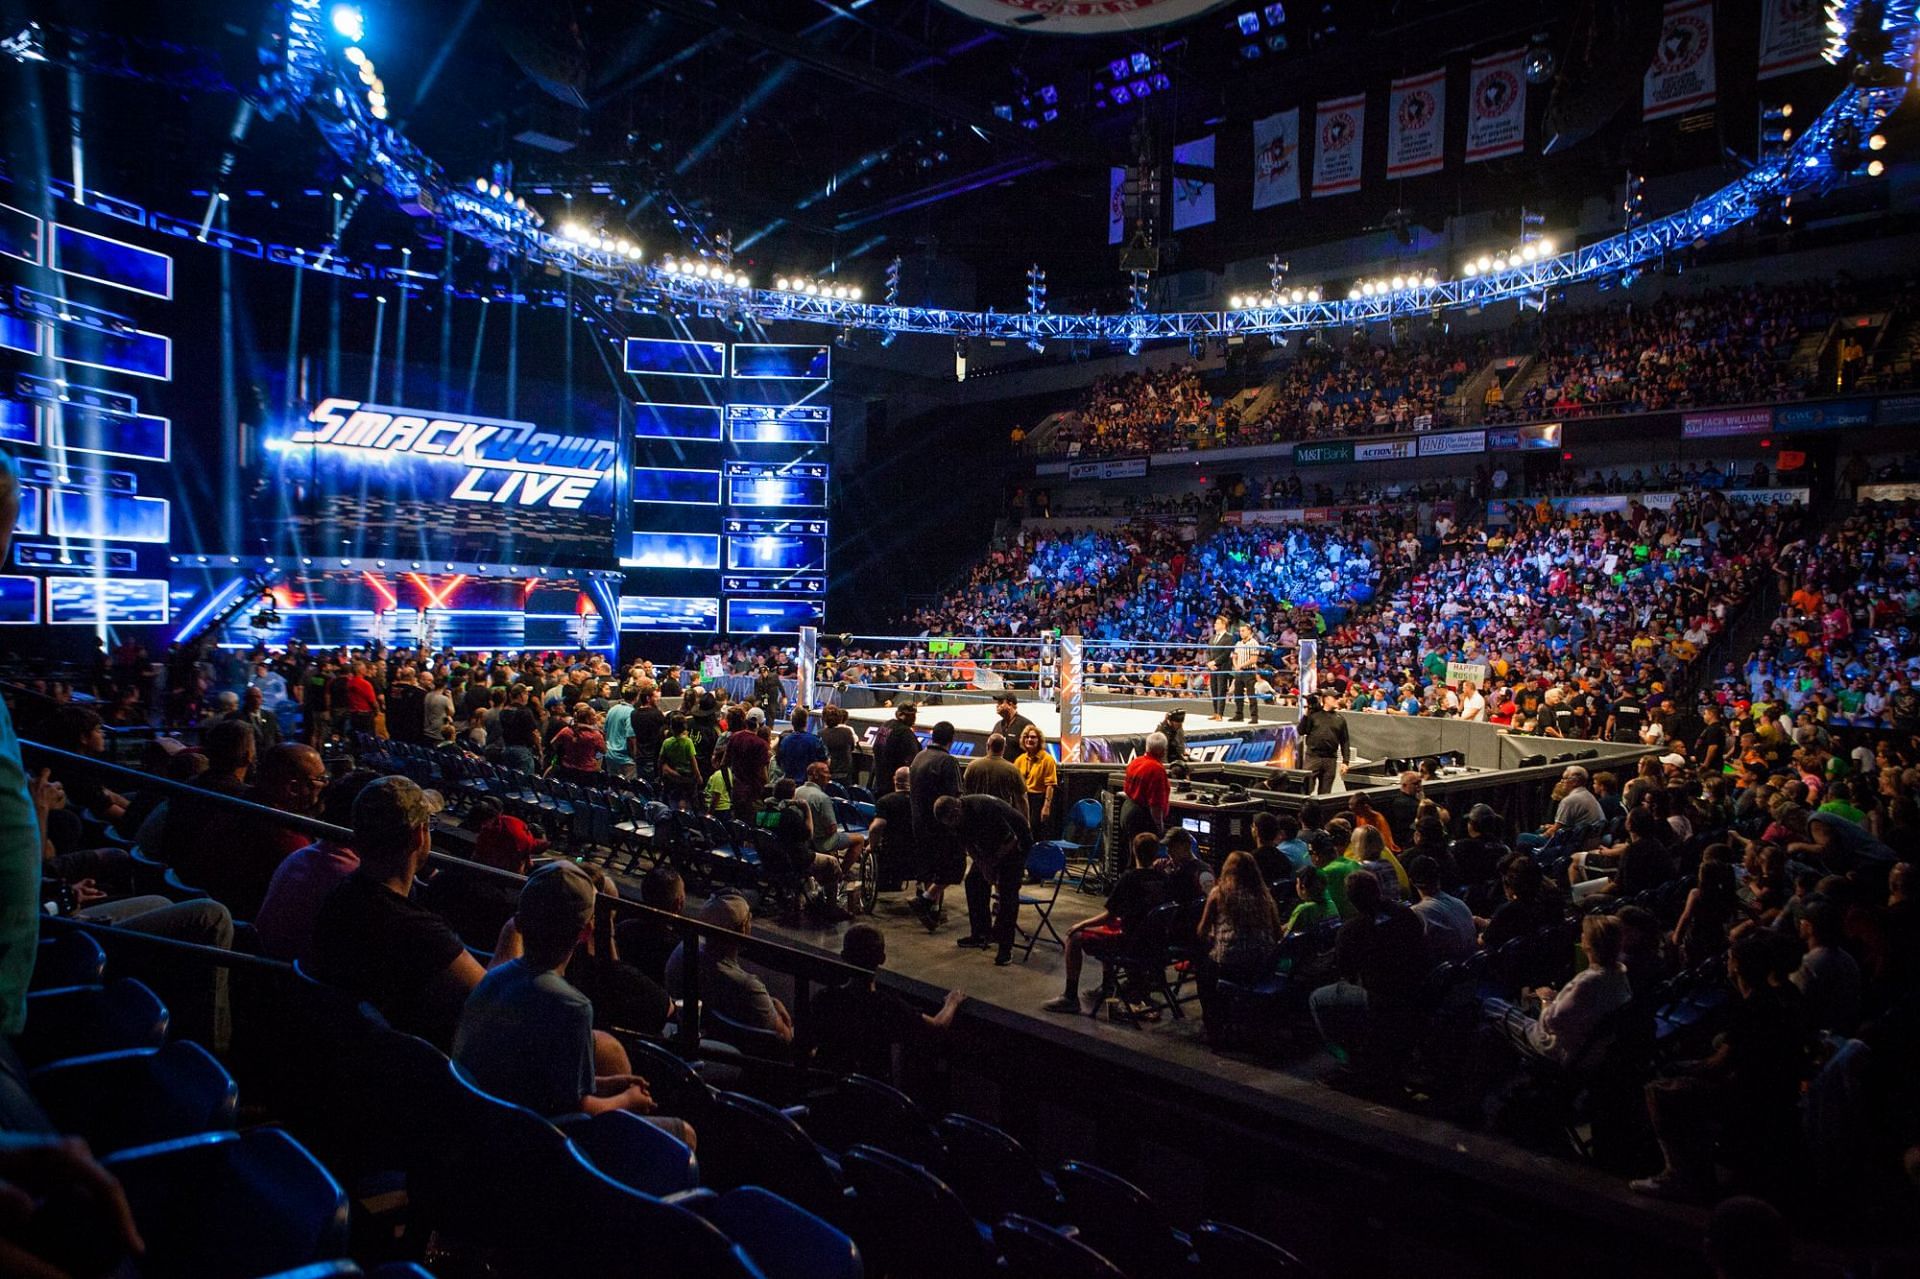 WWE SmackDown tonight will be held in Knoxville, Tennessee